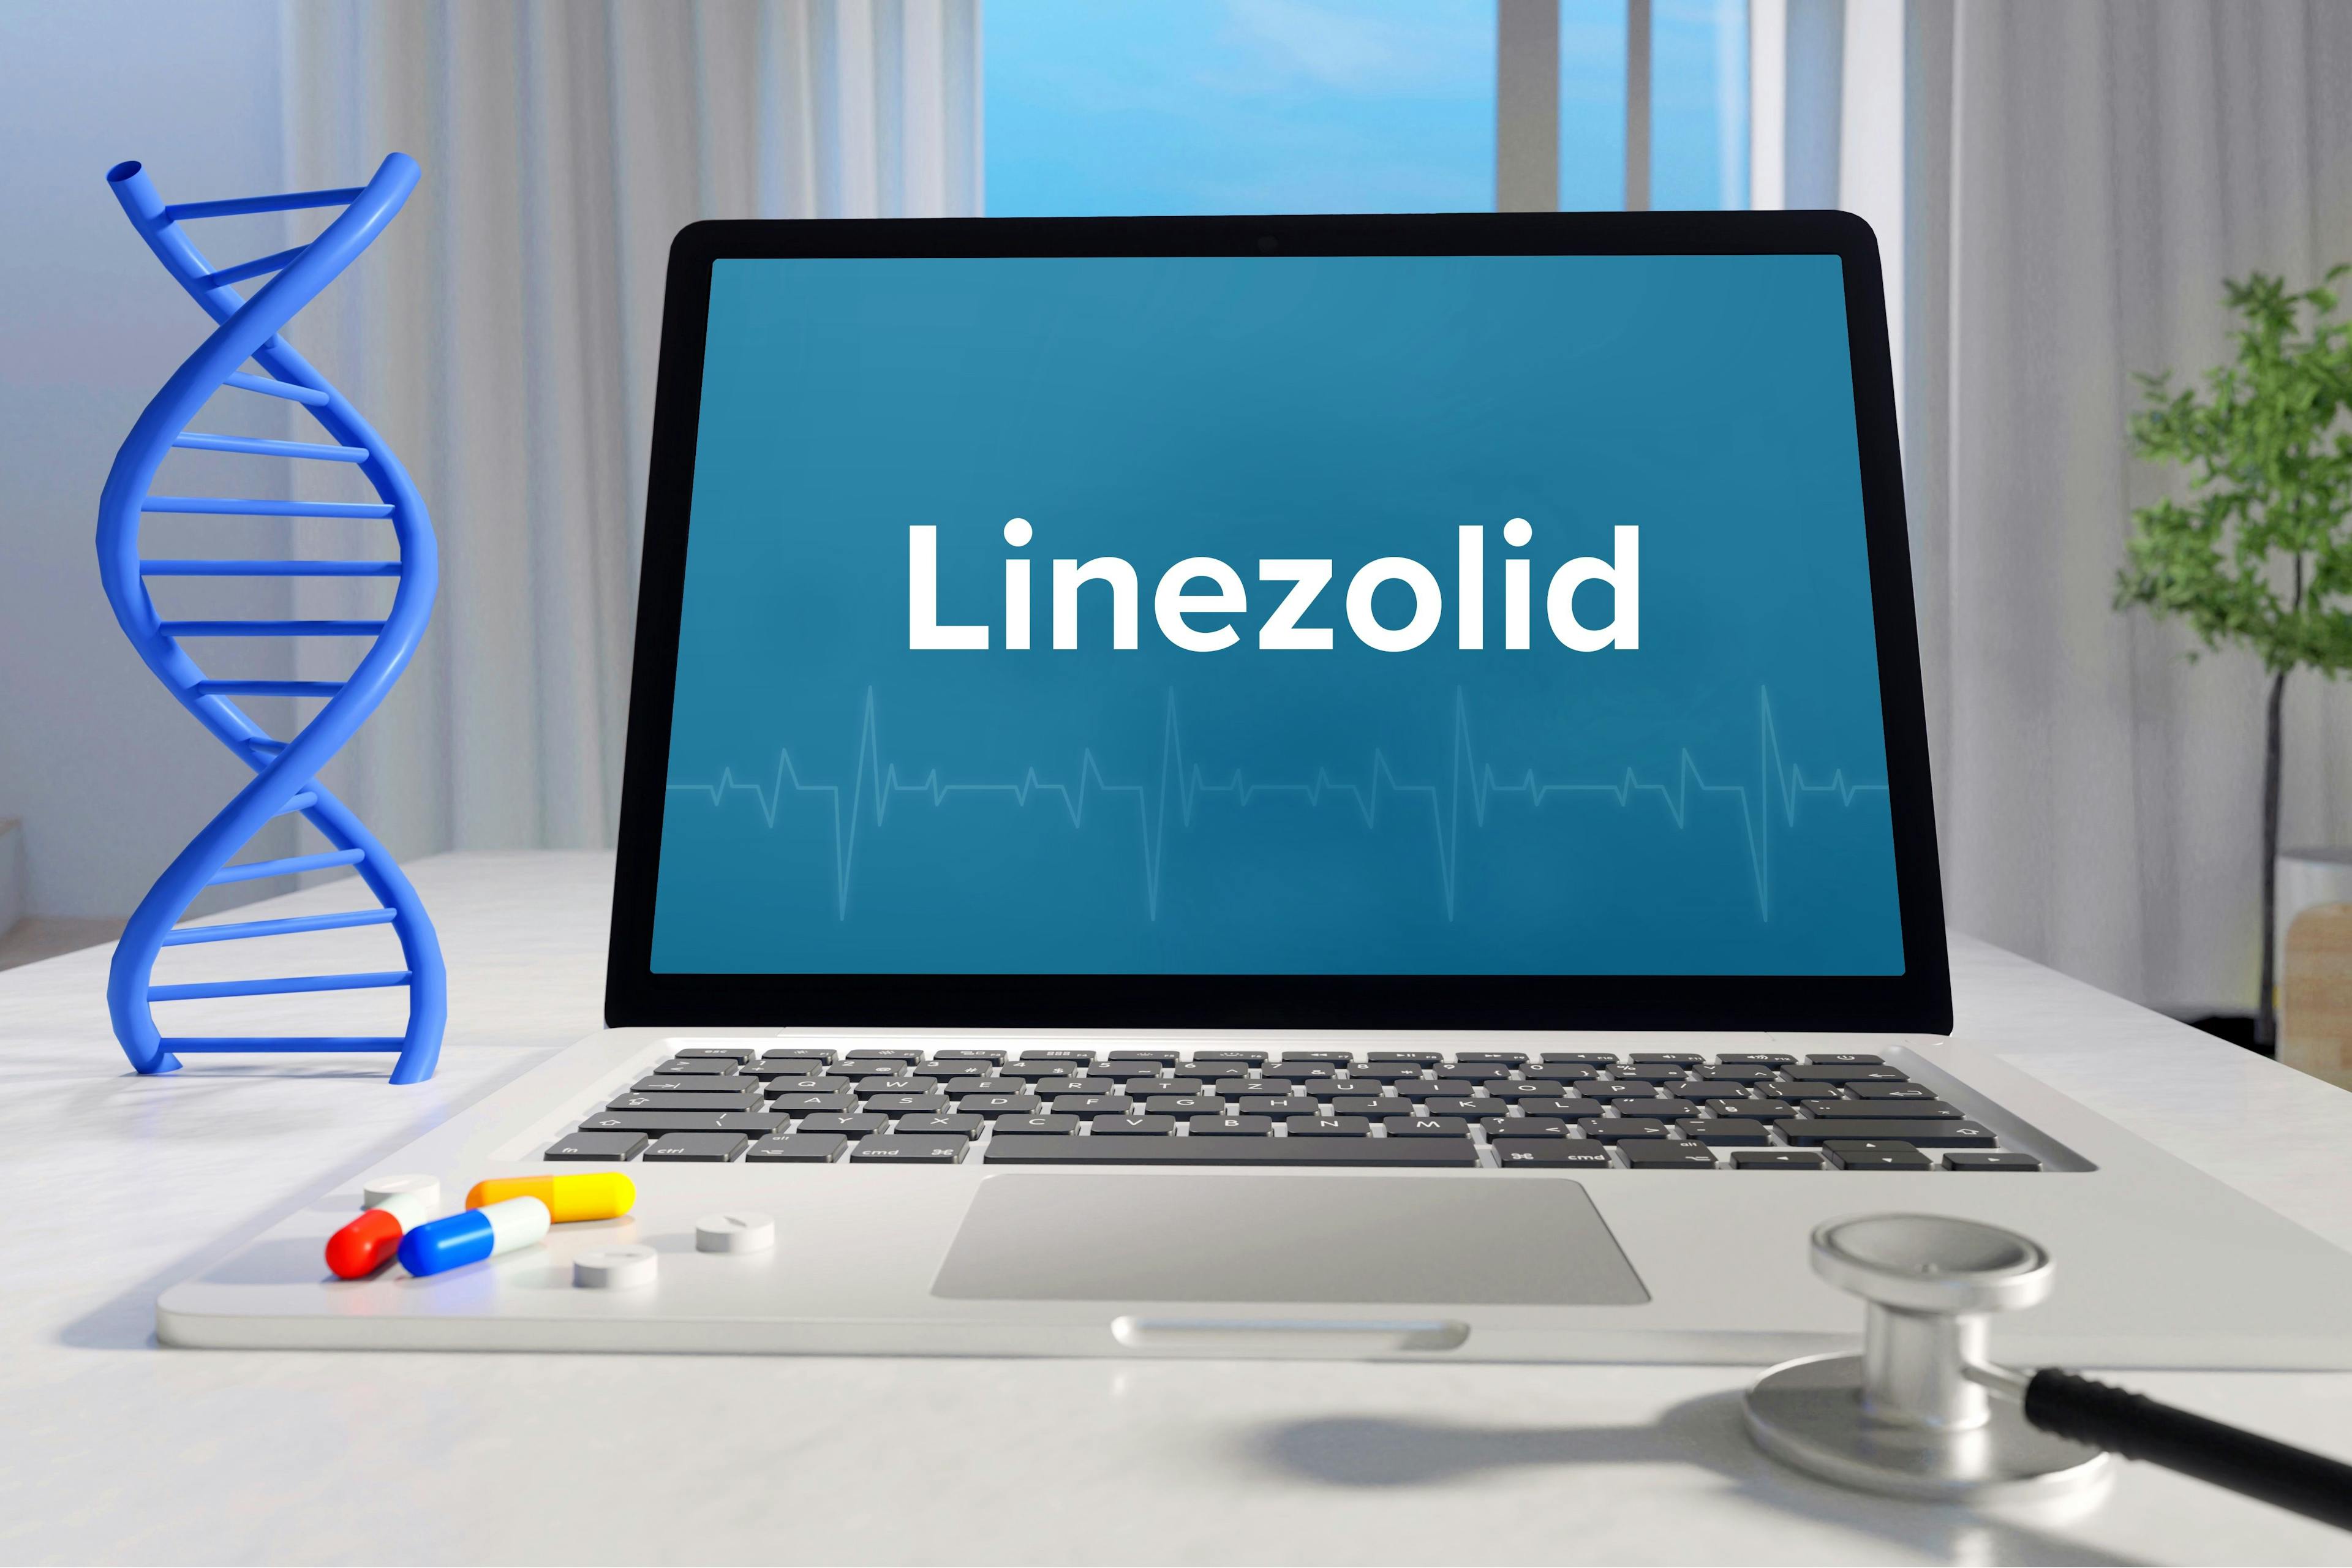 Linezolid Coadministration With Medications for Opioid Use Disorder: A Serotonin Toxicity Tightrope?